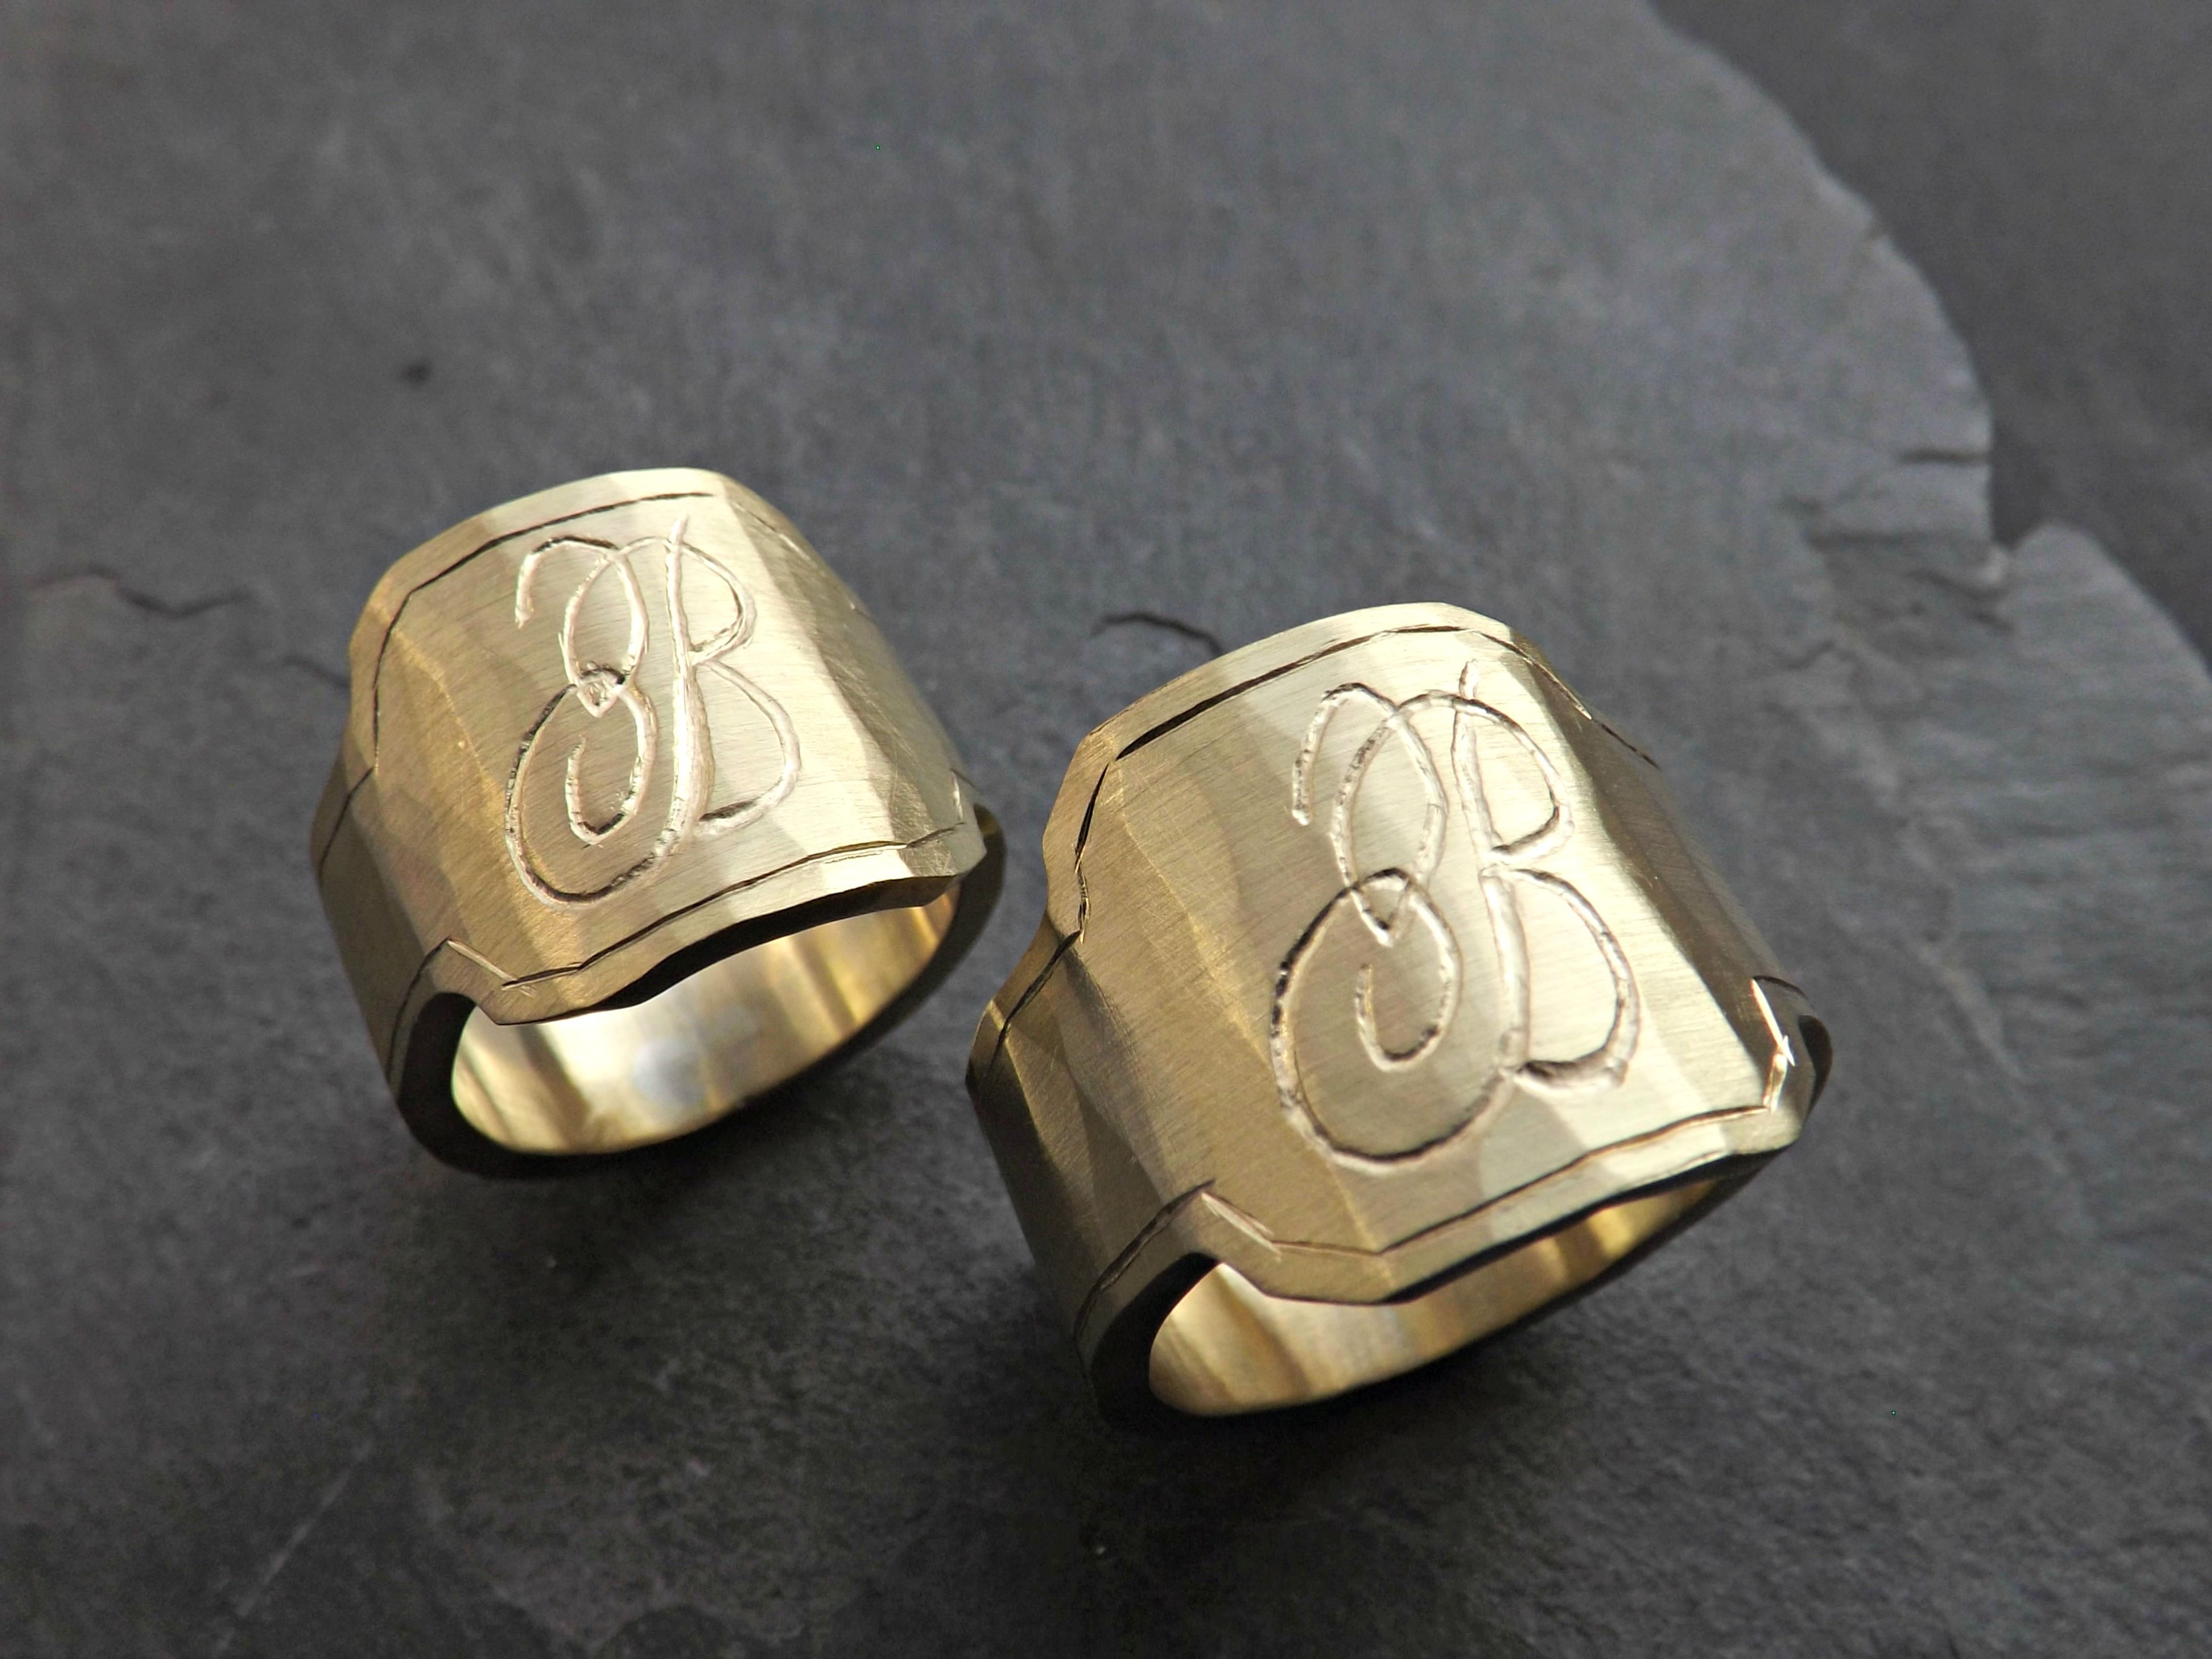 Buy a Hand Crafted Mens Ring Brass, Engraved Monogram Ring, Big